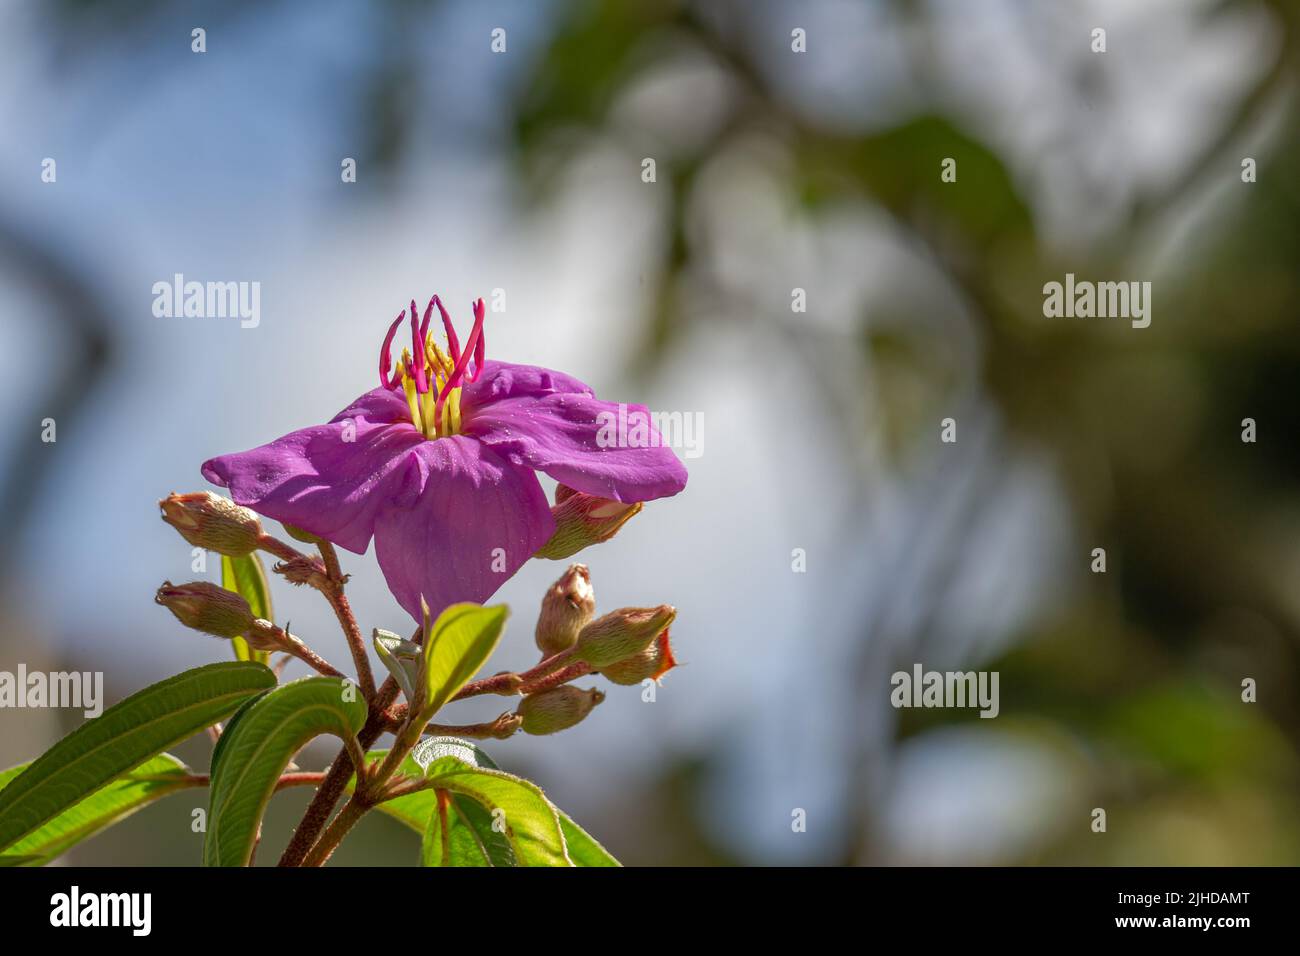 Flowers and fruit of Indian rhododendron plant, purple petals, green heart-shaped leaves with a rough surface. Mountain natural vegetation Stock Photo